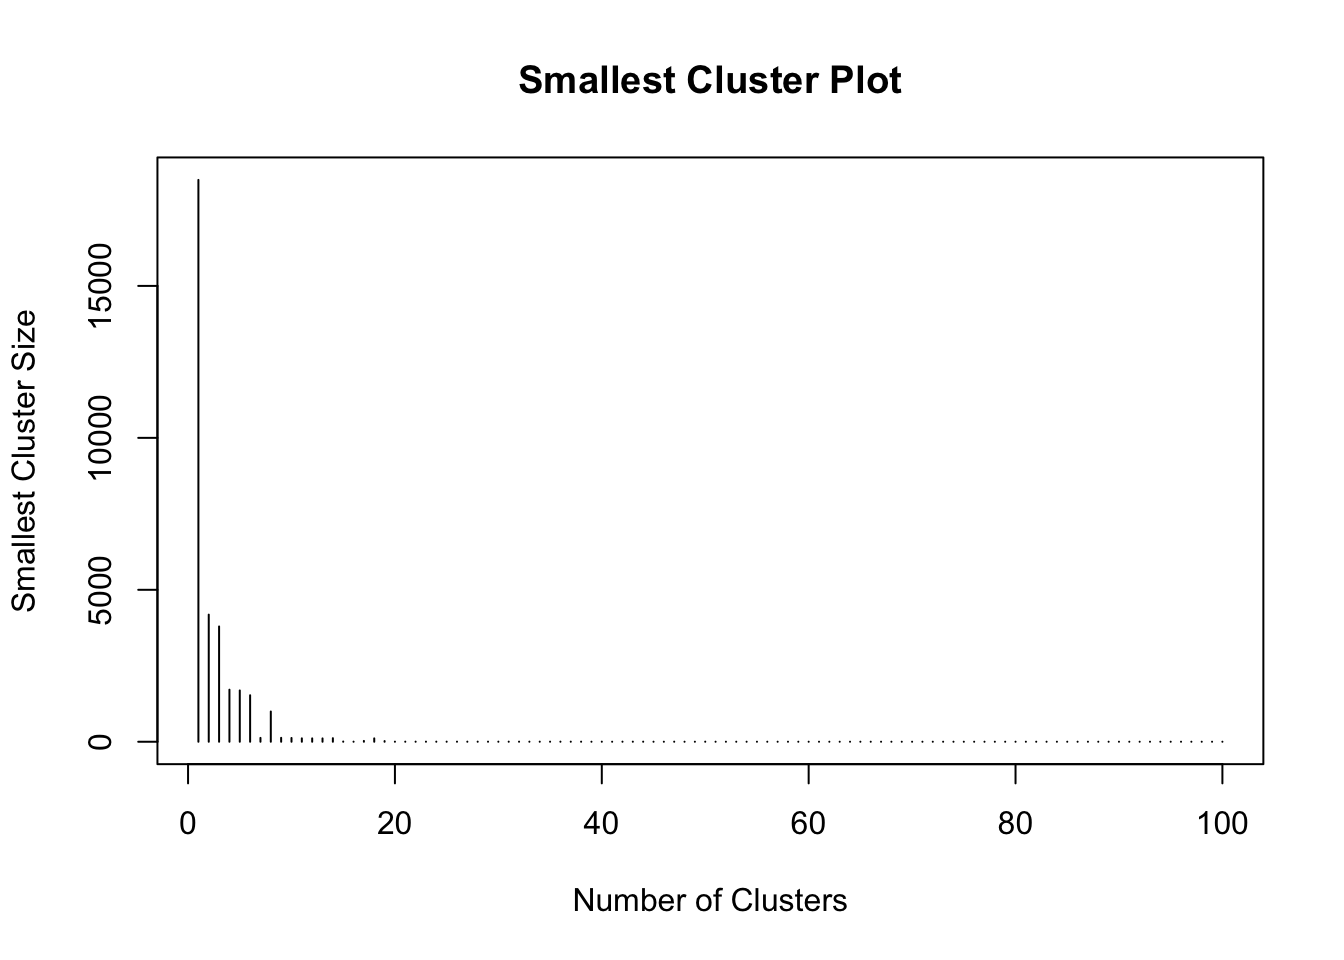 The smallest cluster size counts against cluster number.